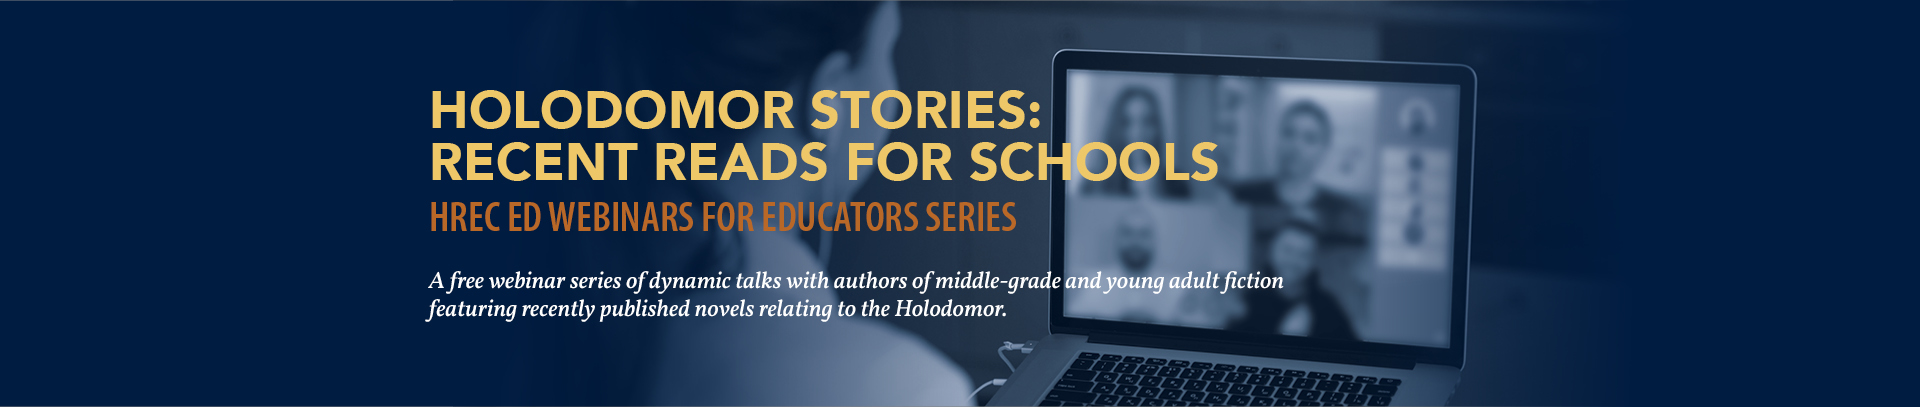 HOLODOMOR STORIES: RECENT READS FOR SCHOOLS